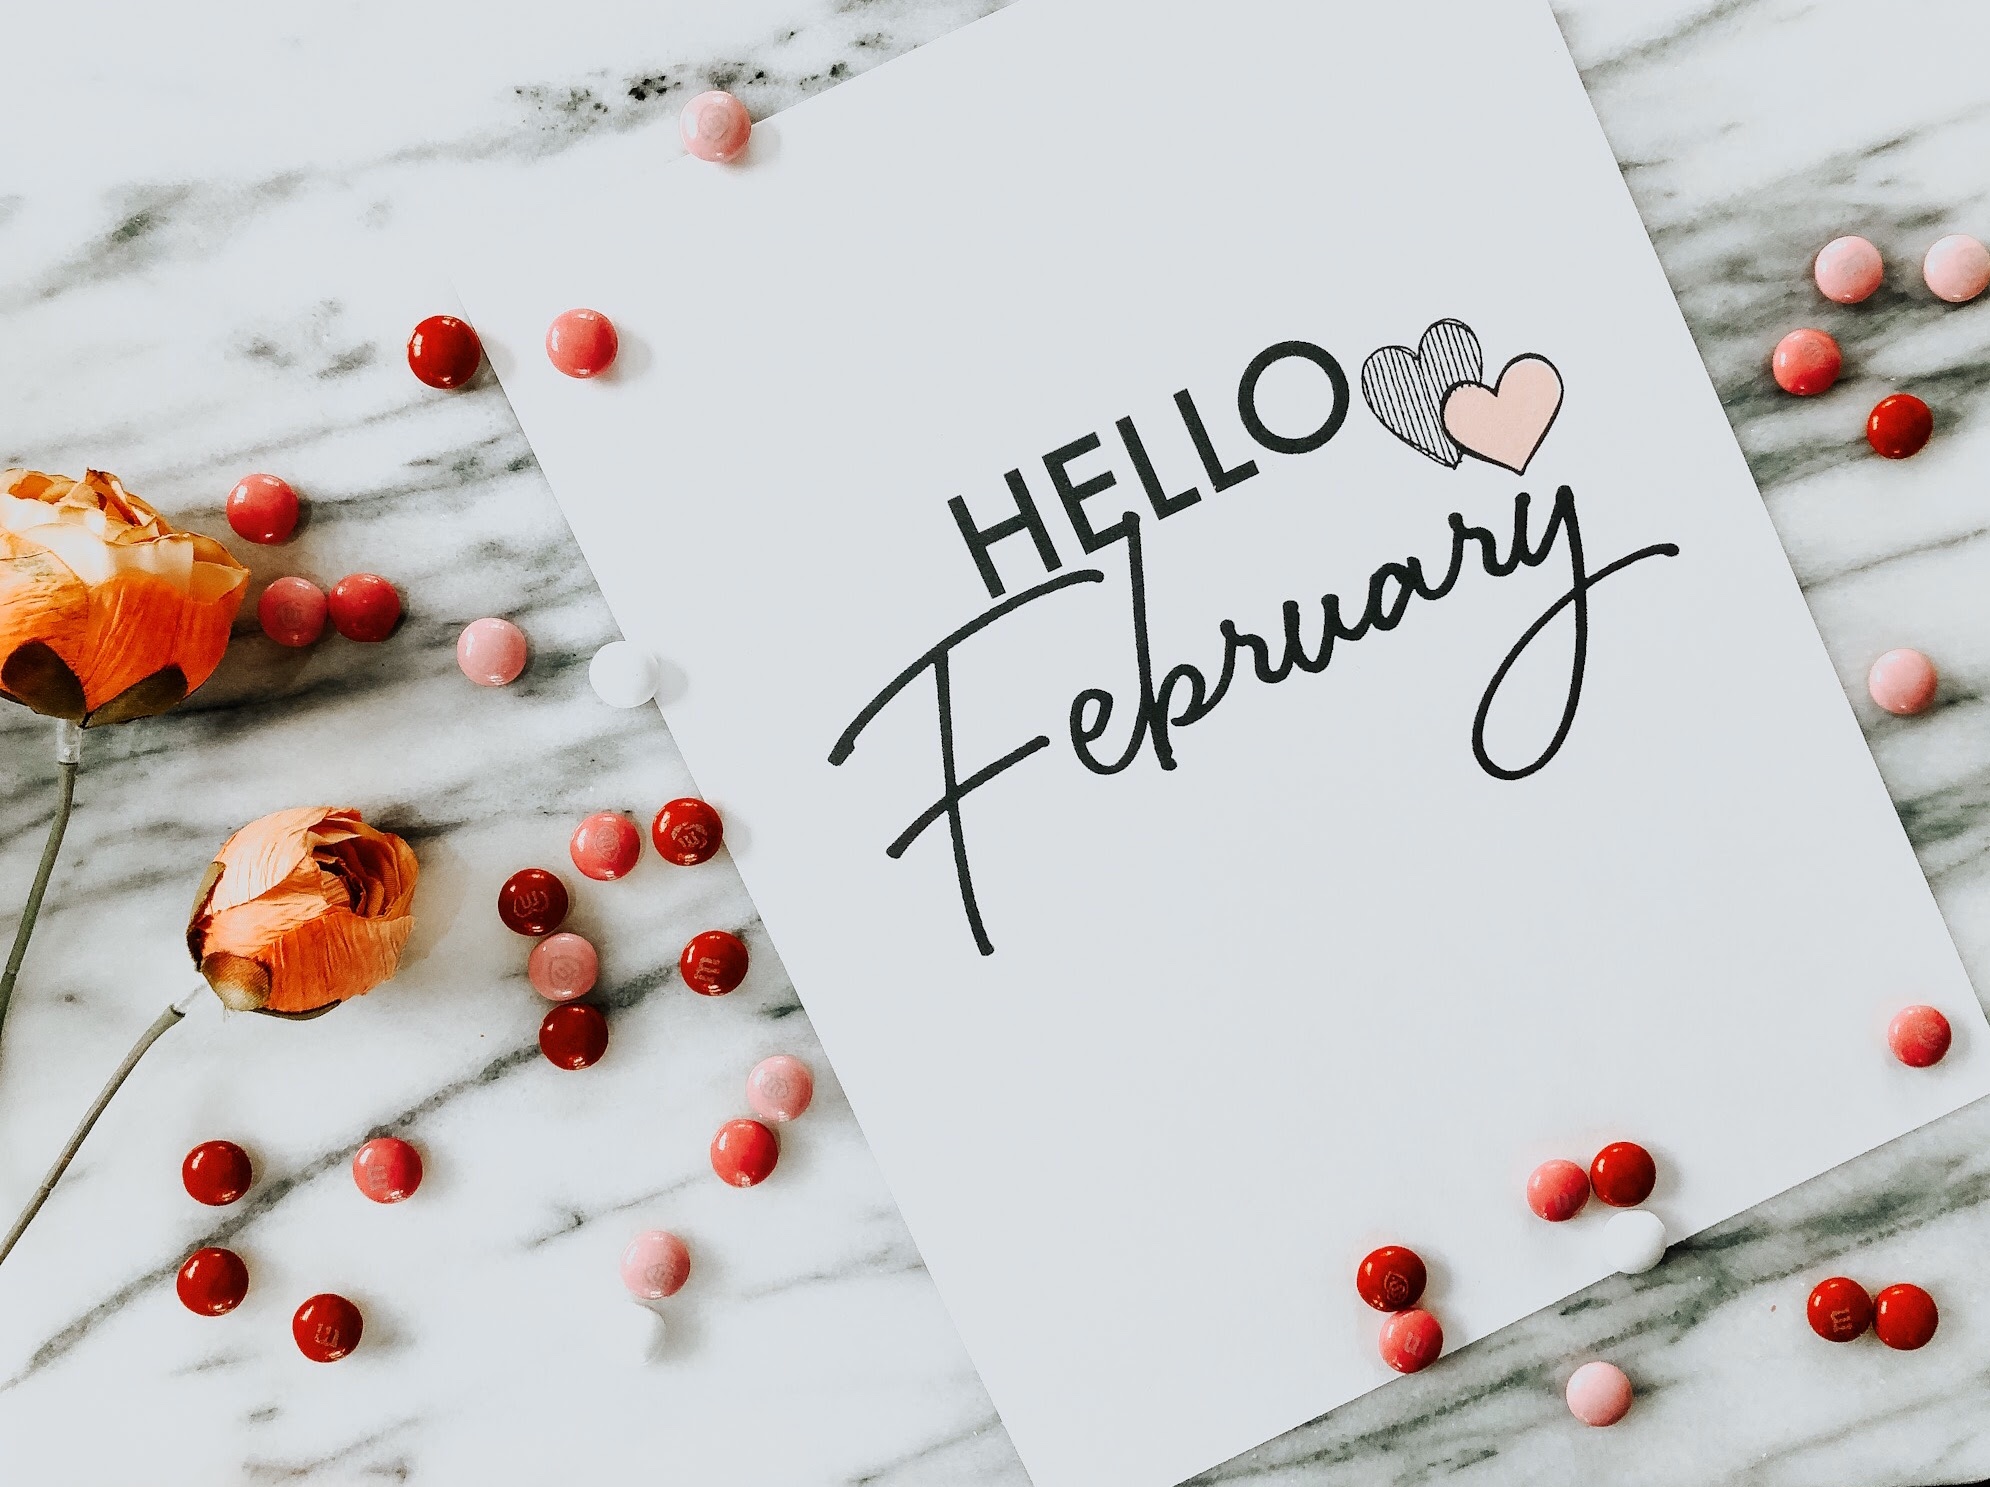 https://thisisourbliss.com/wp-content/uploads/2020/01/Hello-February-with-candies-and-flowers-This-is-our-Bliss.jpg